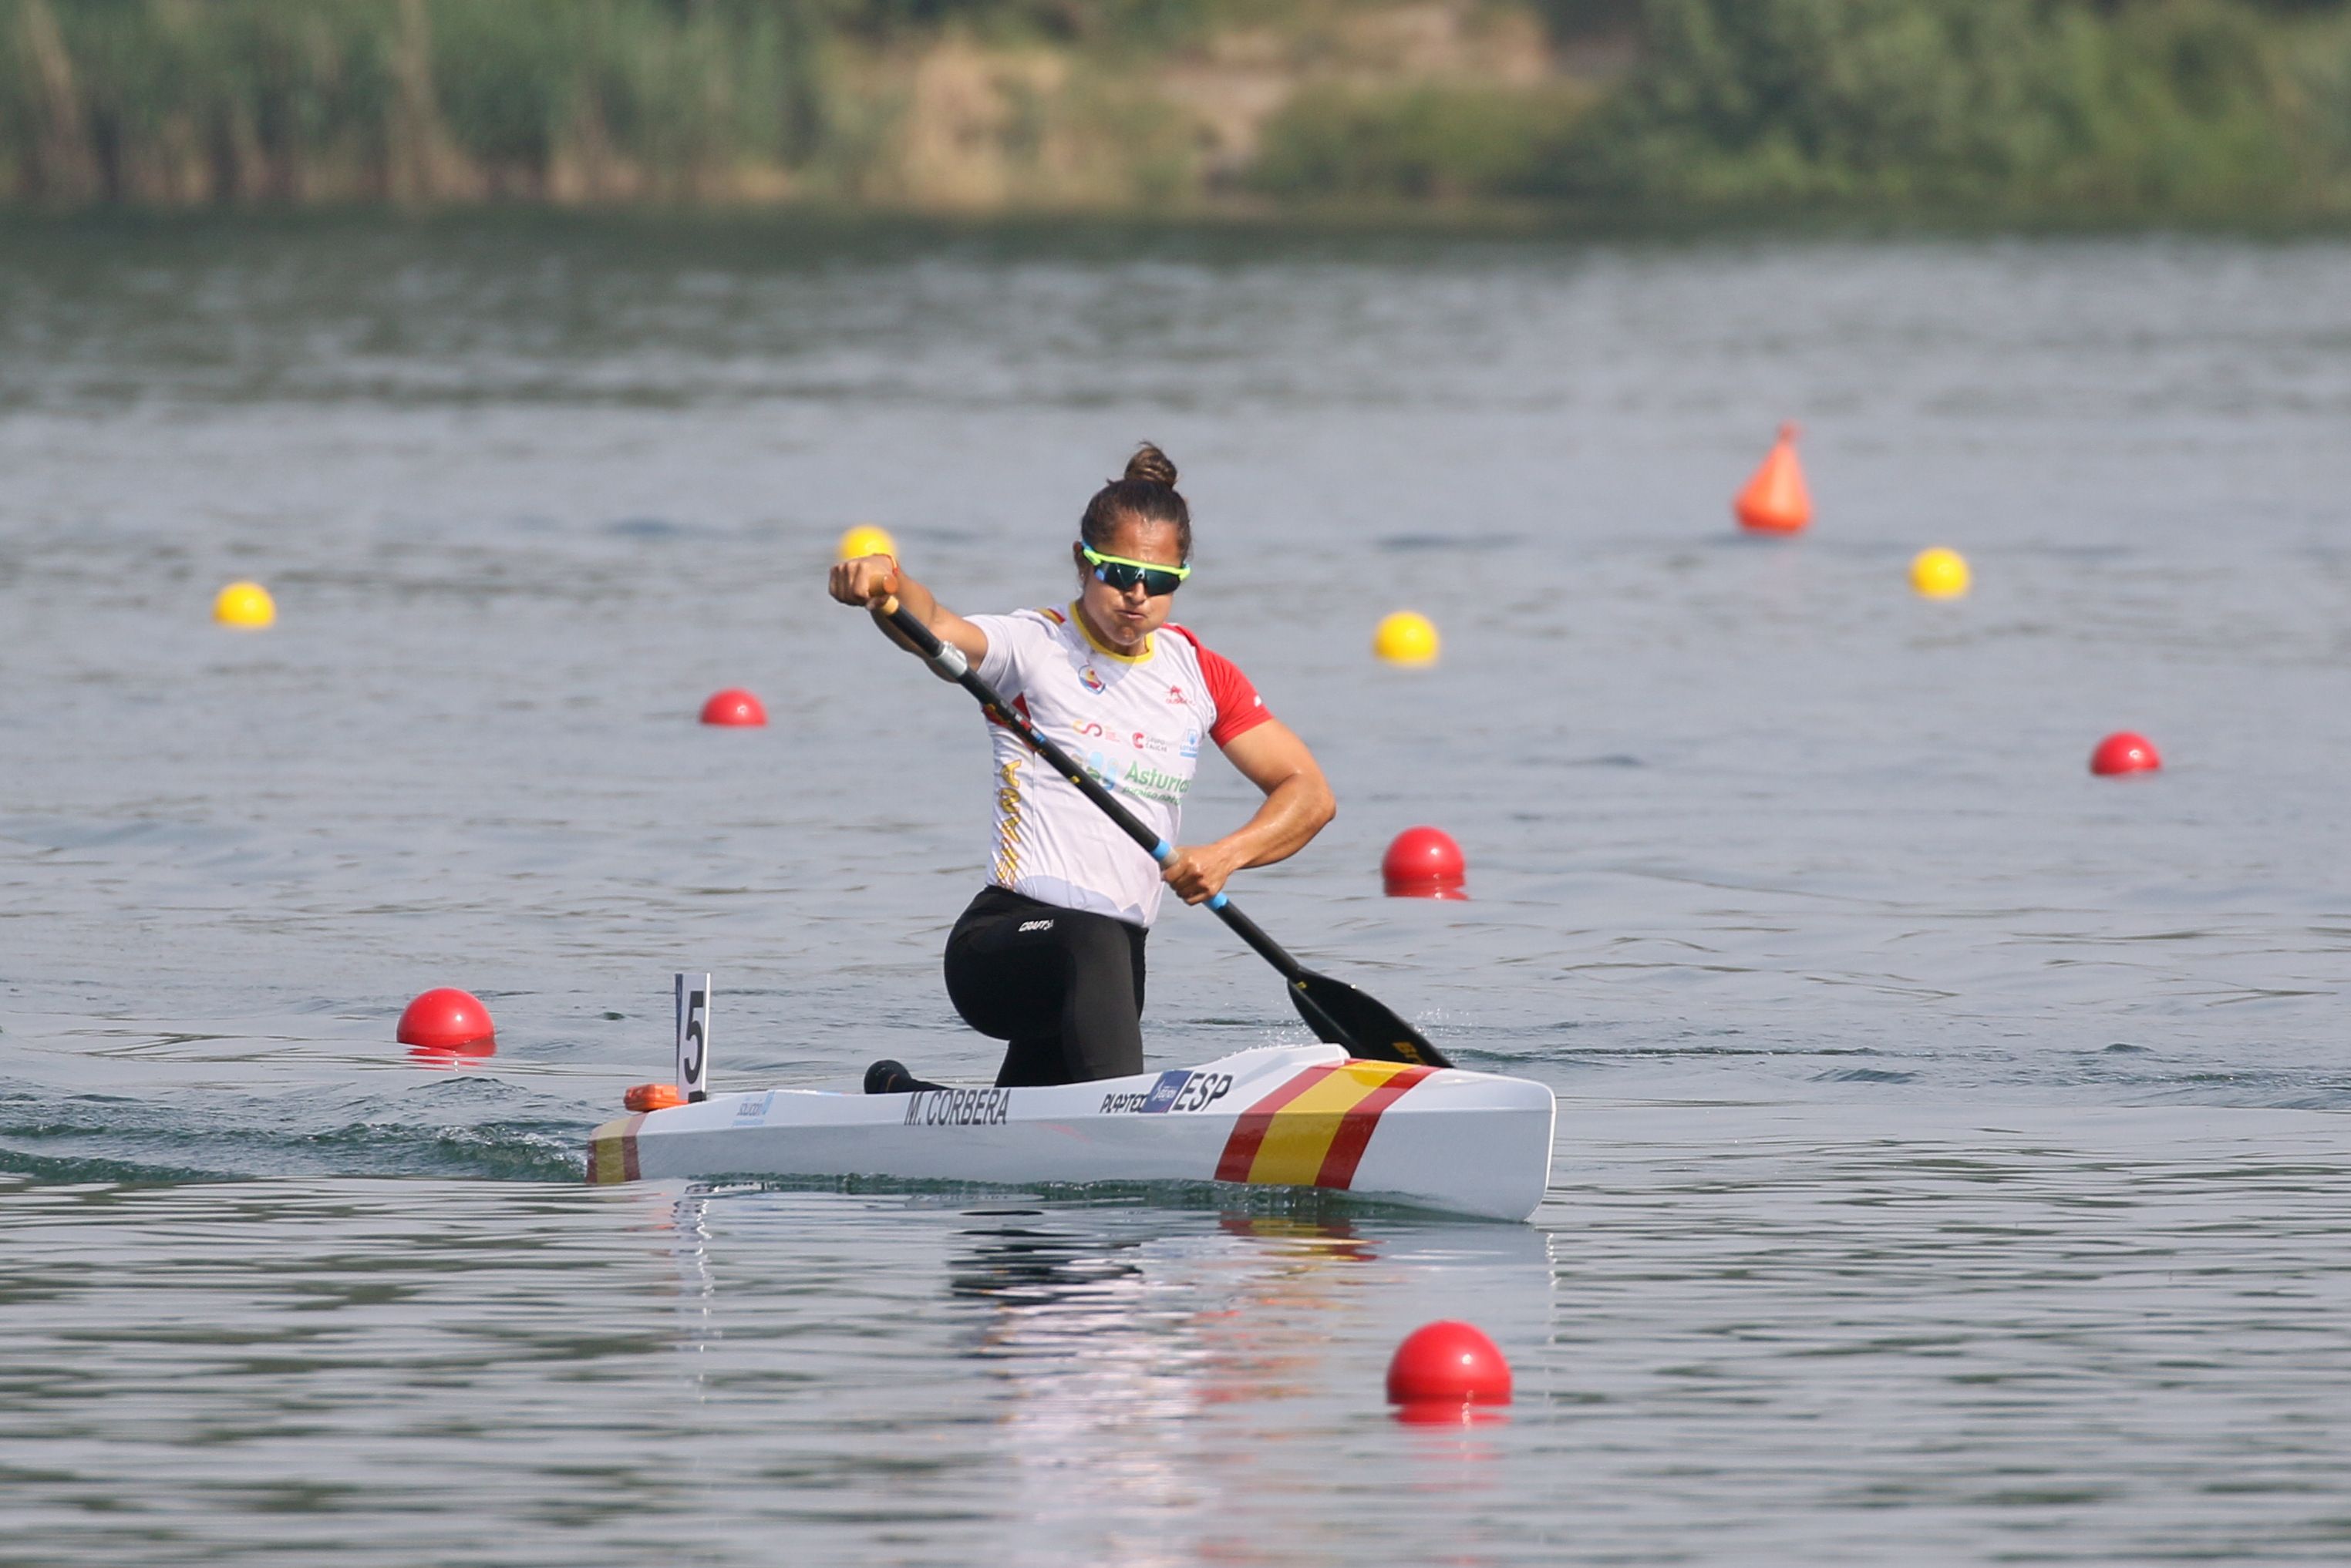 All set for the final day of Canoe Sprint competition